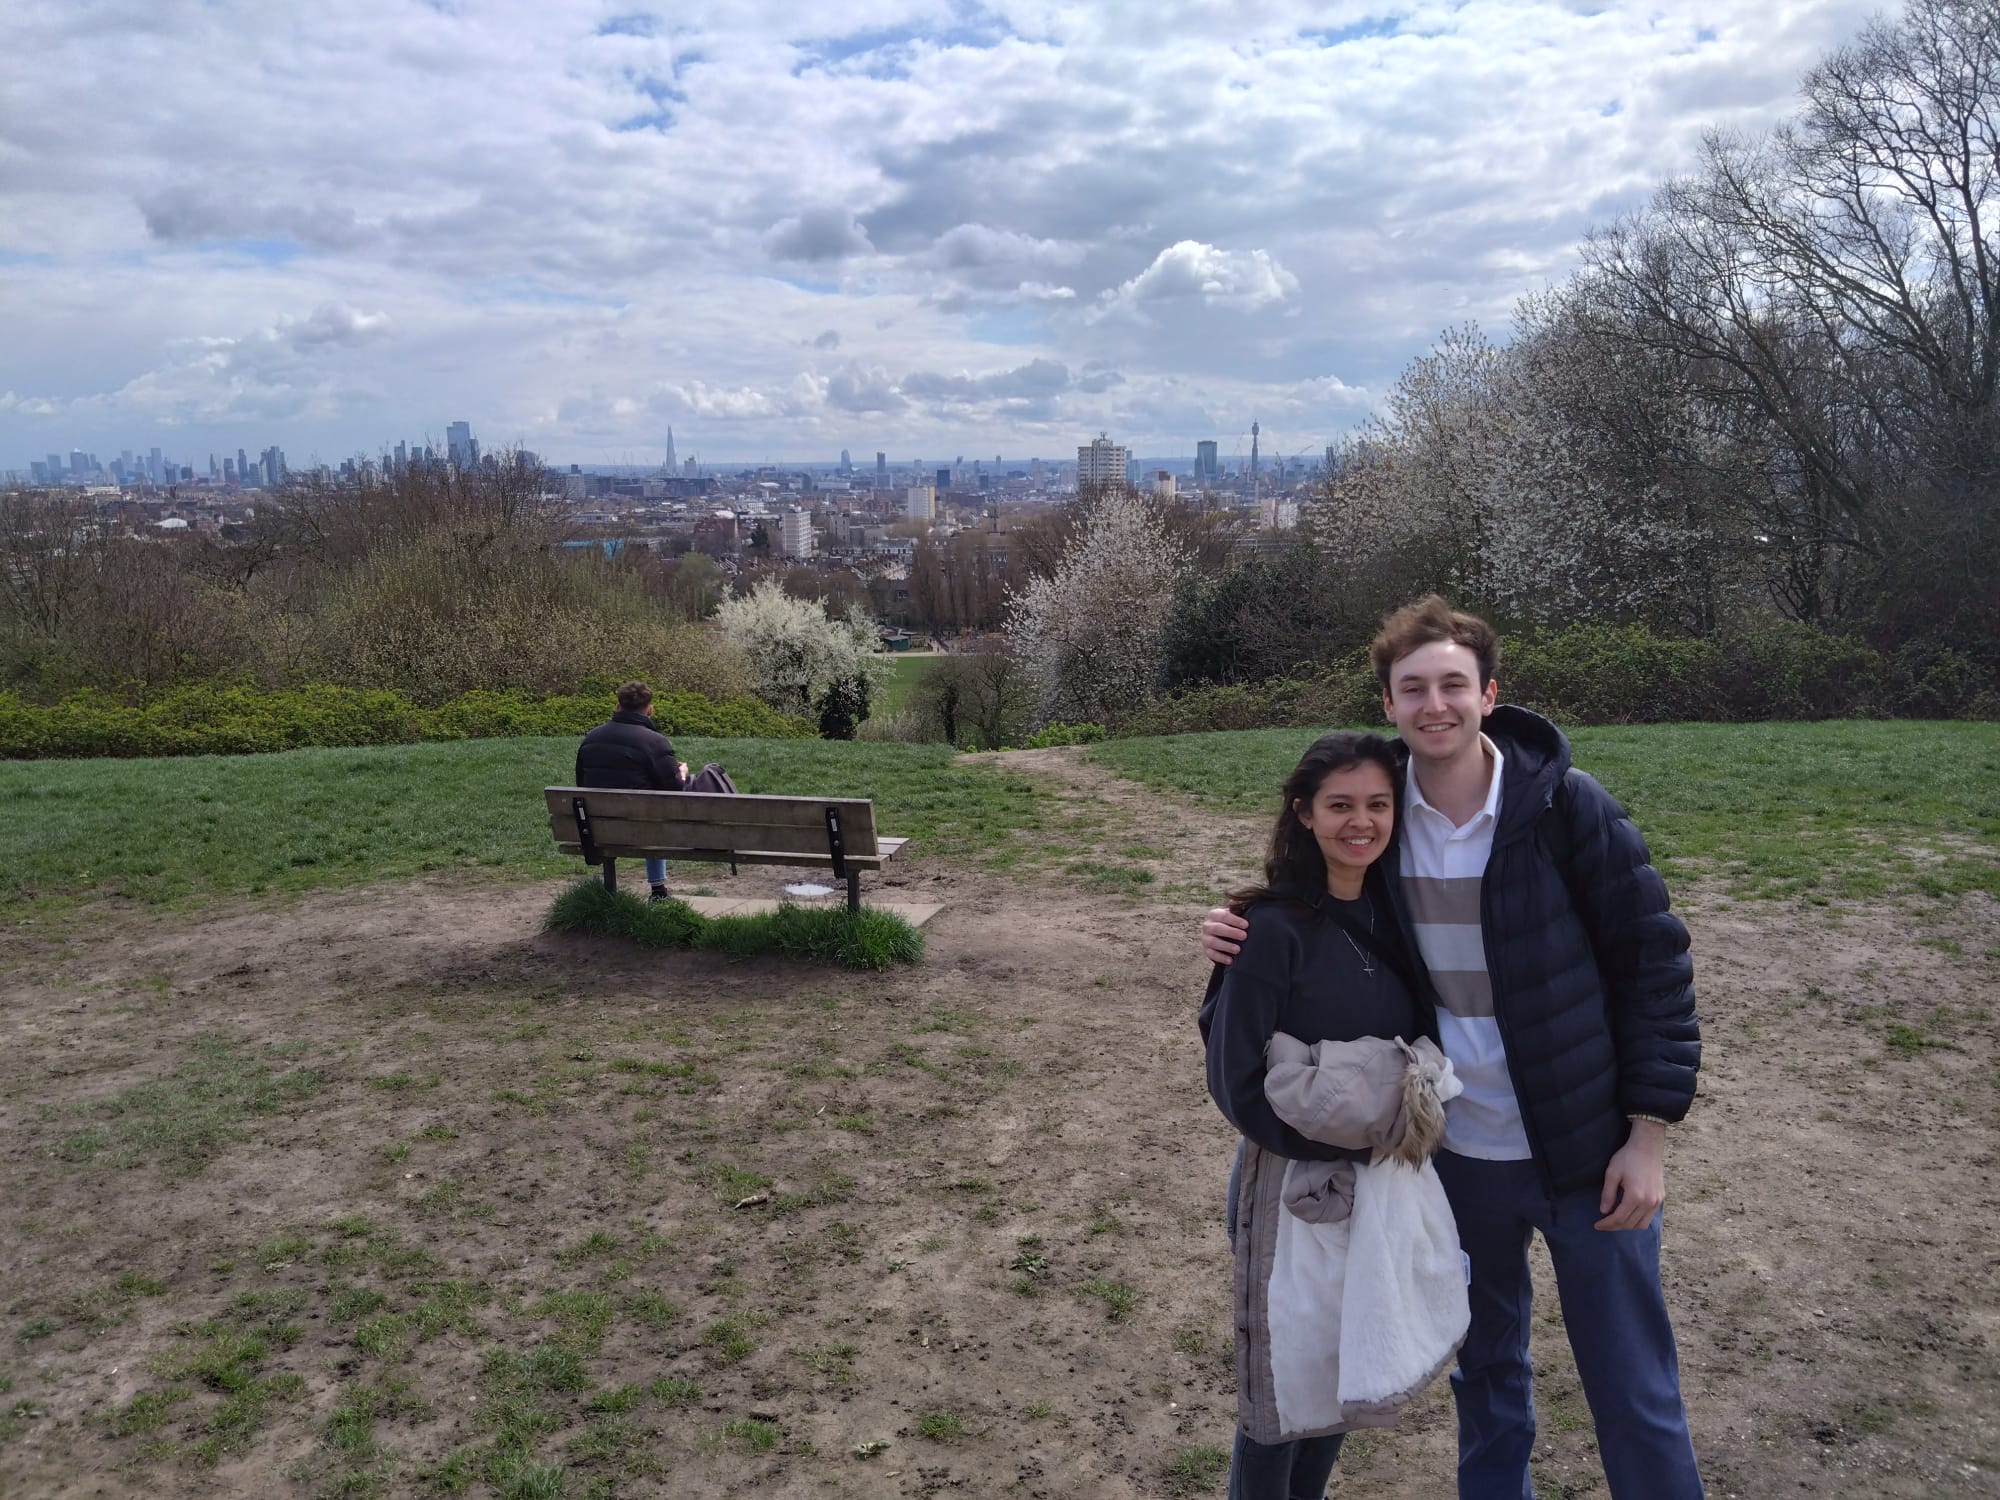 Me and a fellow intern at Hampstead Heath overlooking London